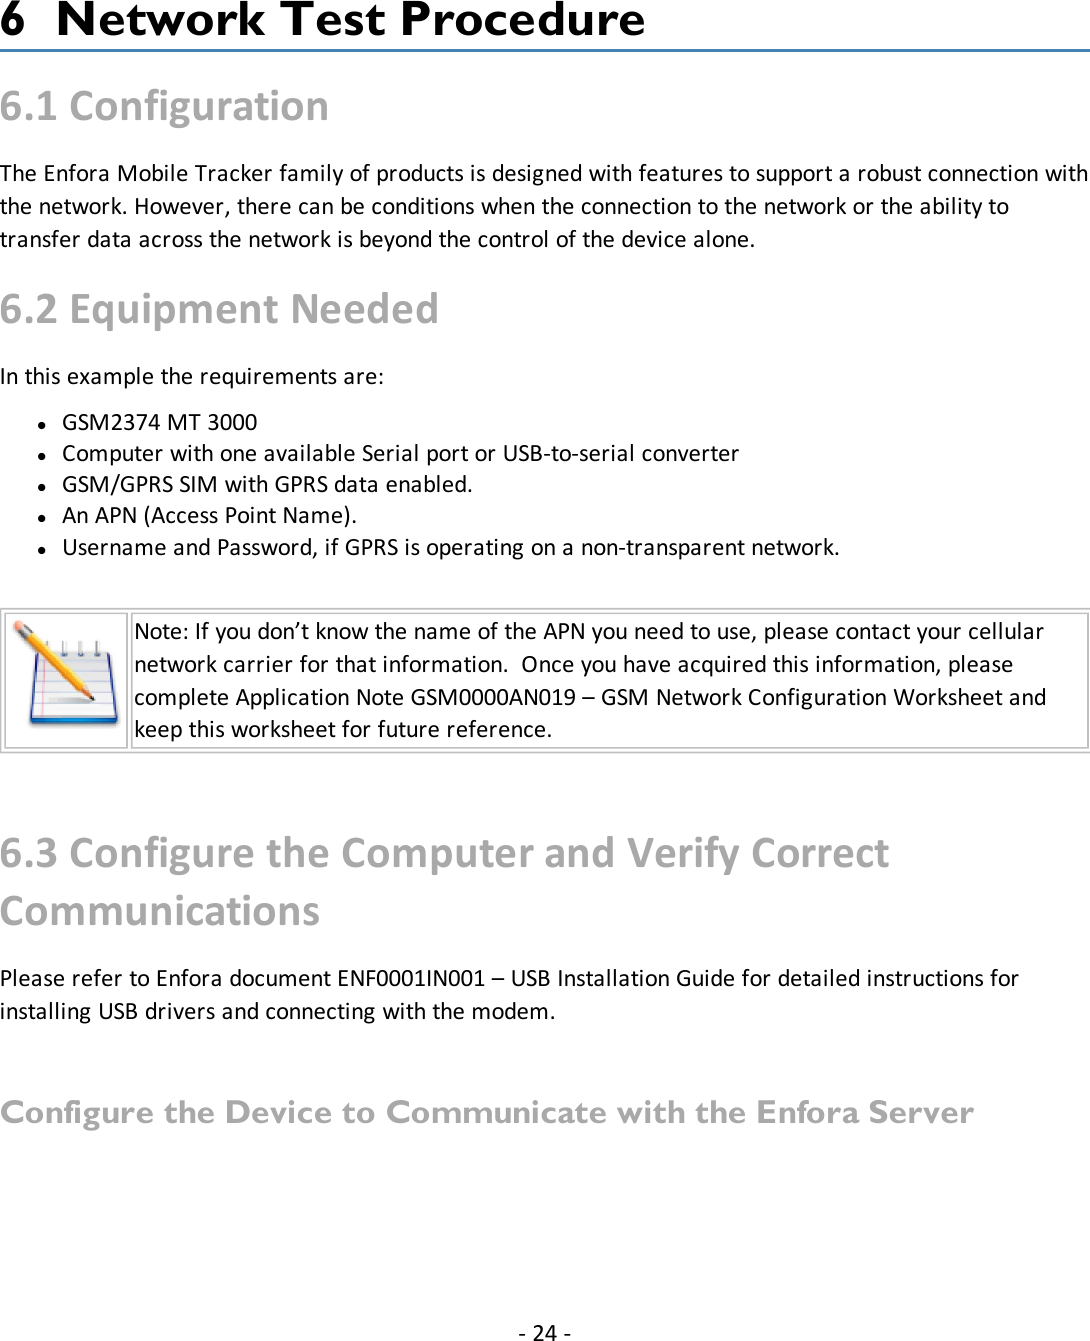 6 Network Test Procedure6.1 ConfigurationThe Enfora Mobile Tracker family of products is designed with features to support a robust connection withthe network. However, there can be conditions when the connection to the network or the ability totransfer data across the network is beyond the control of the device alone.6.2 Equipment NeededIn this example the requirements are:lGSM2374 MT 3000lComputer with one available Serial port or USB-to-serial converterlGSM/GPRS SIM with GPRS data enabled.lAn APN (Access Point Name).lUsername and Password, if GPRS is operating on a non-transparent network.Note: If you don’t know the name of the APN you need to use, please contact your cellularnetwork carrier for that information. Once you have acquired this information, pleasecomplete Application Note GSM0000AN019 – GSM Network Configuration Worksheet andkeep this worksheet for future reference.6.3 Configure the Computer and Verify CorrectCommunicationsPlease refer to Enfora document ENF0001IN001 – USB Installation Guide for detailed instructions forinstalling USB drivers and connecting with the modem.Configure the Device to Communicate with the Enfora Server- 24 -